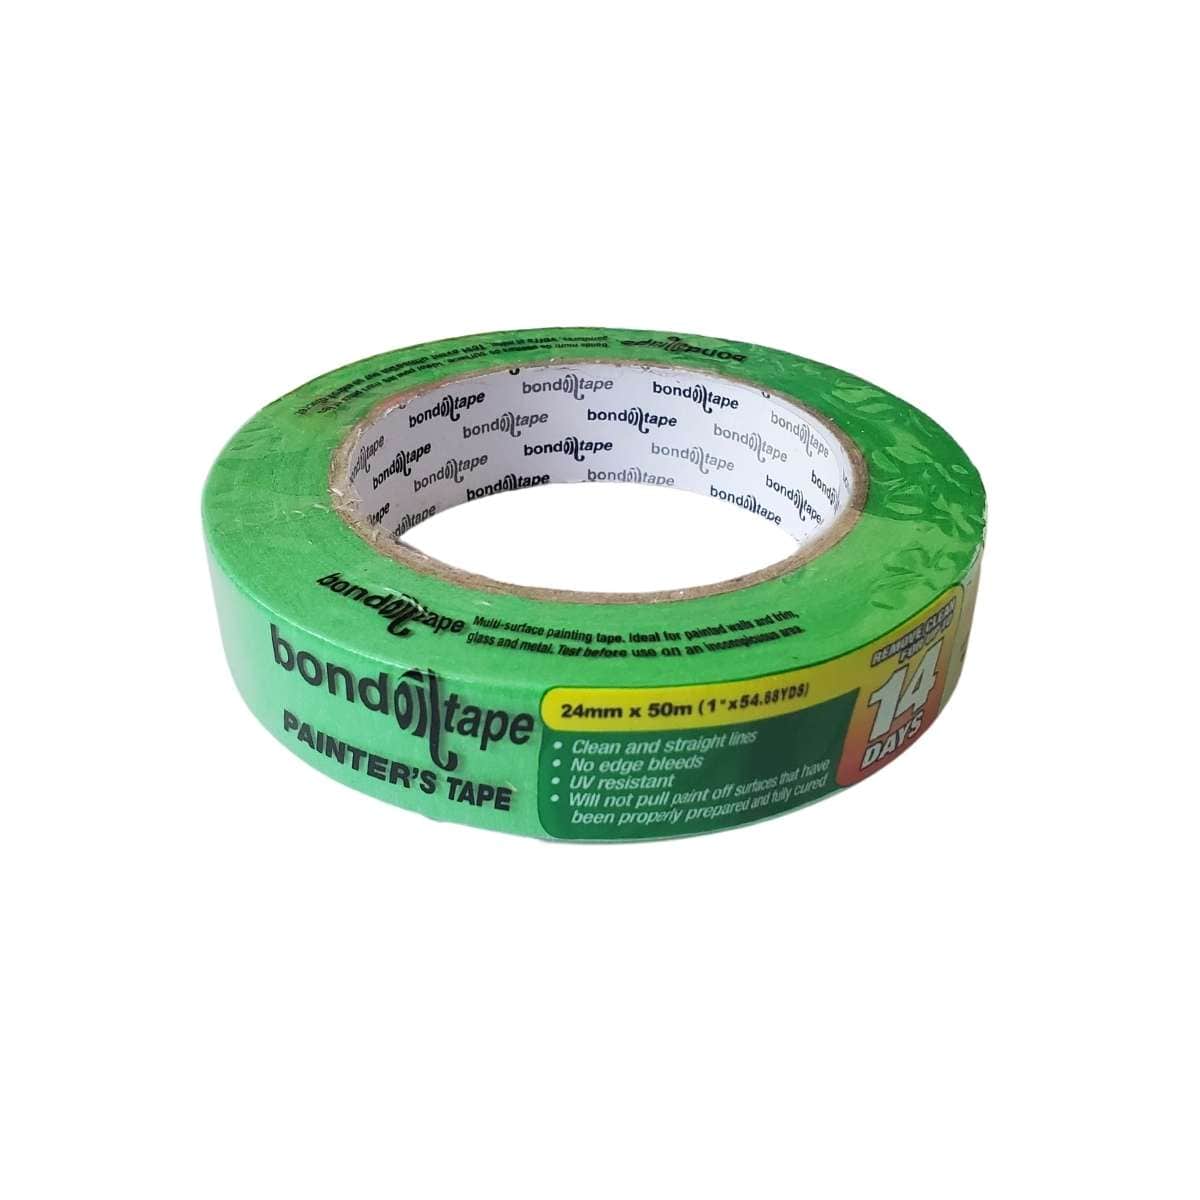 Toolway Painter's Tape Bond Tape - Painter's Tape - 24mm x 50m Roll - Item #122301